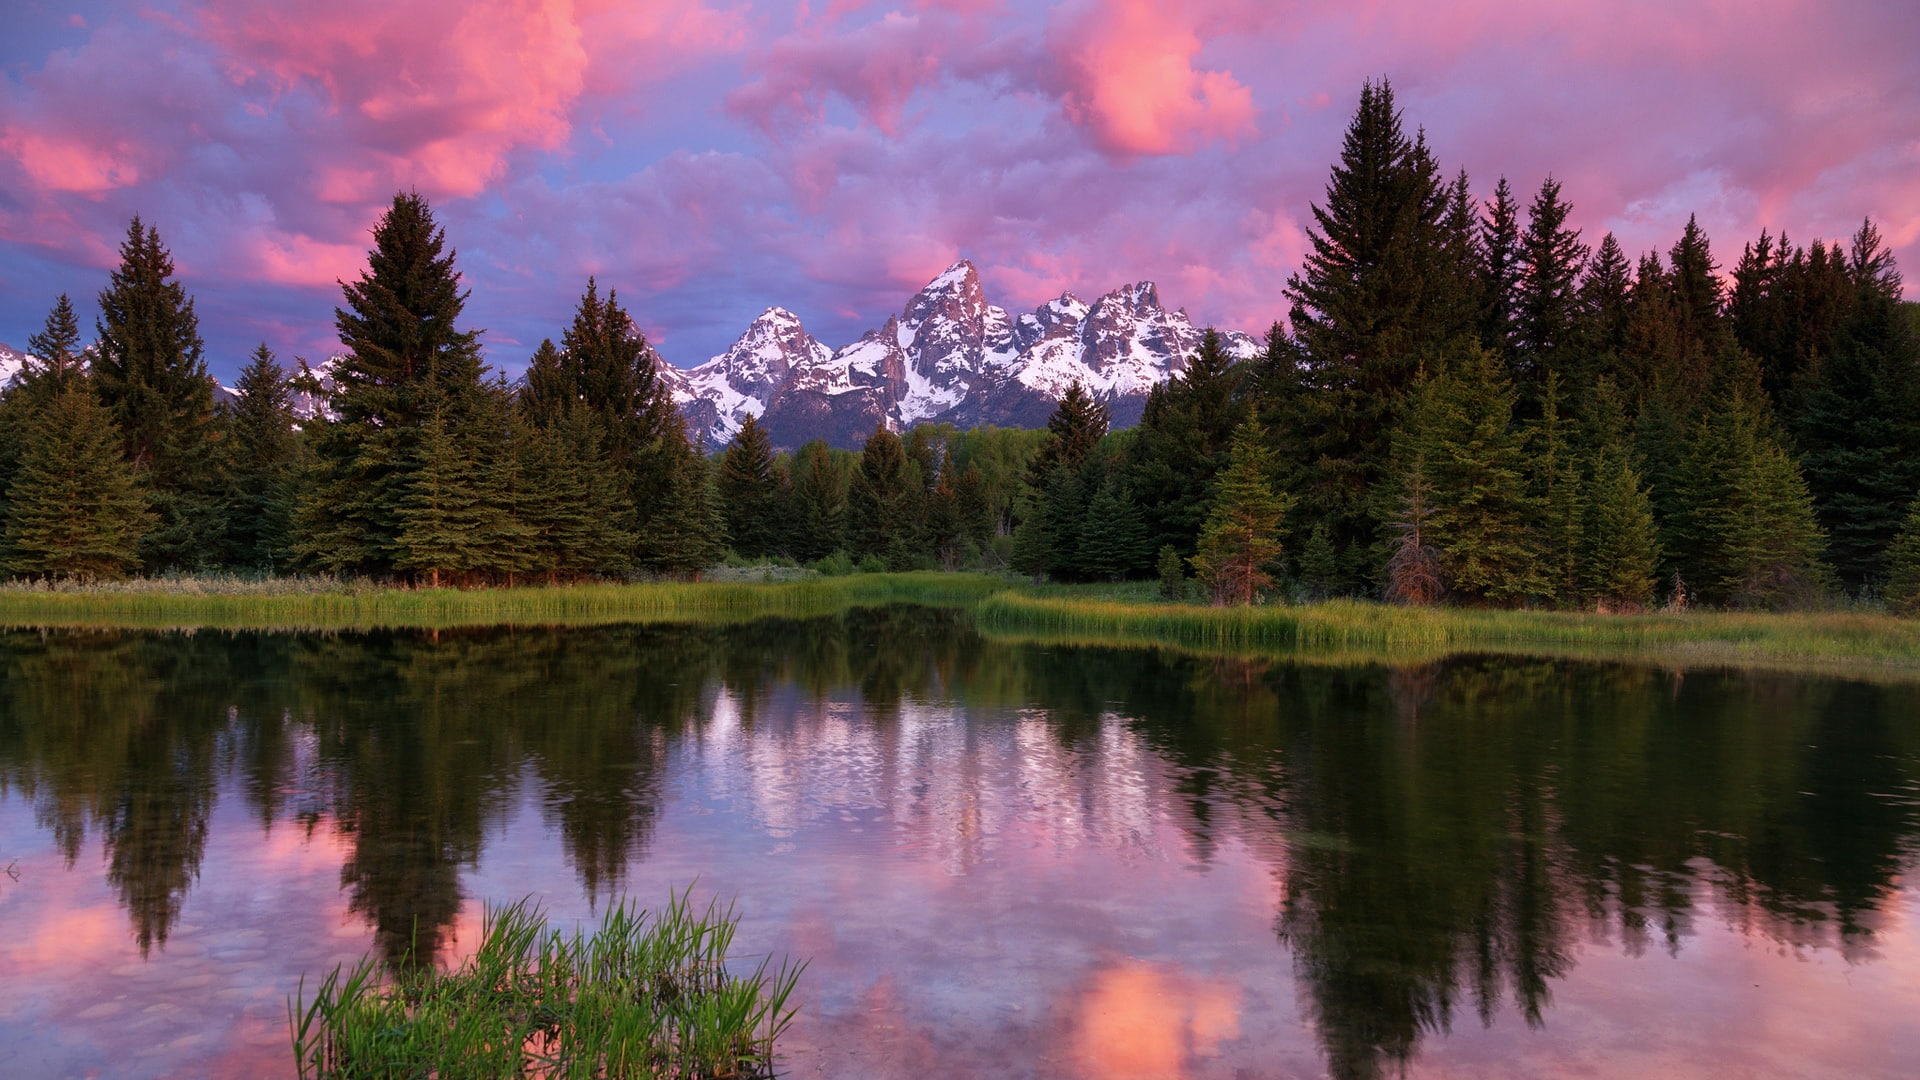 Grand Teton National Park, mountains, lake, trees, forest, water reflection